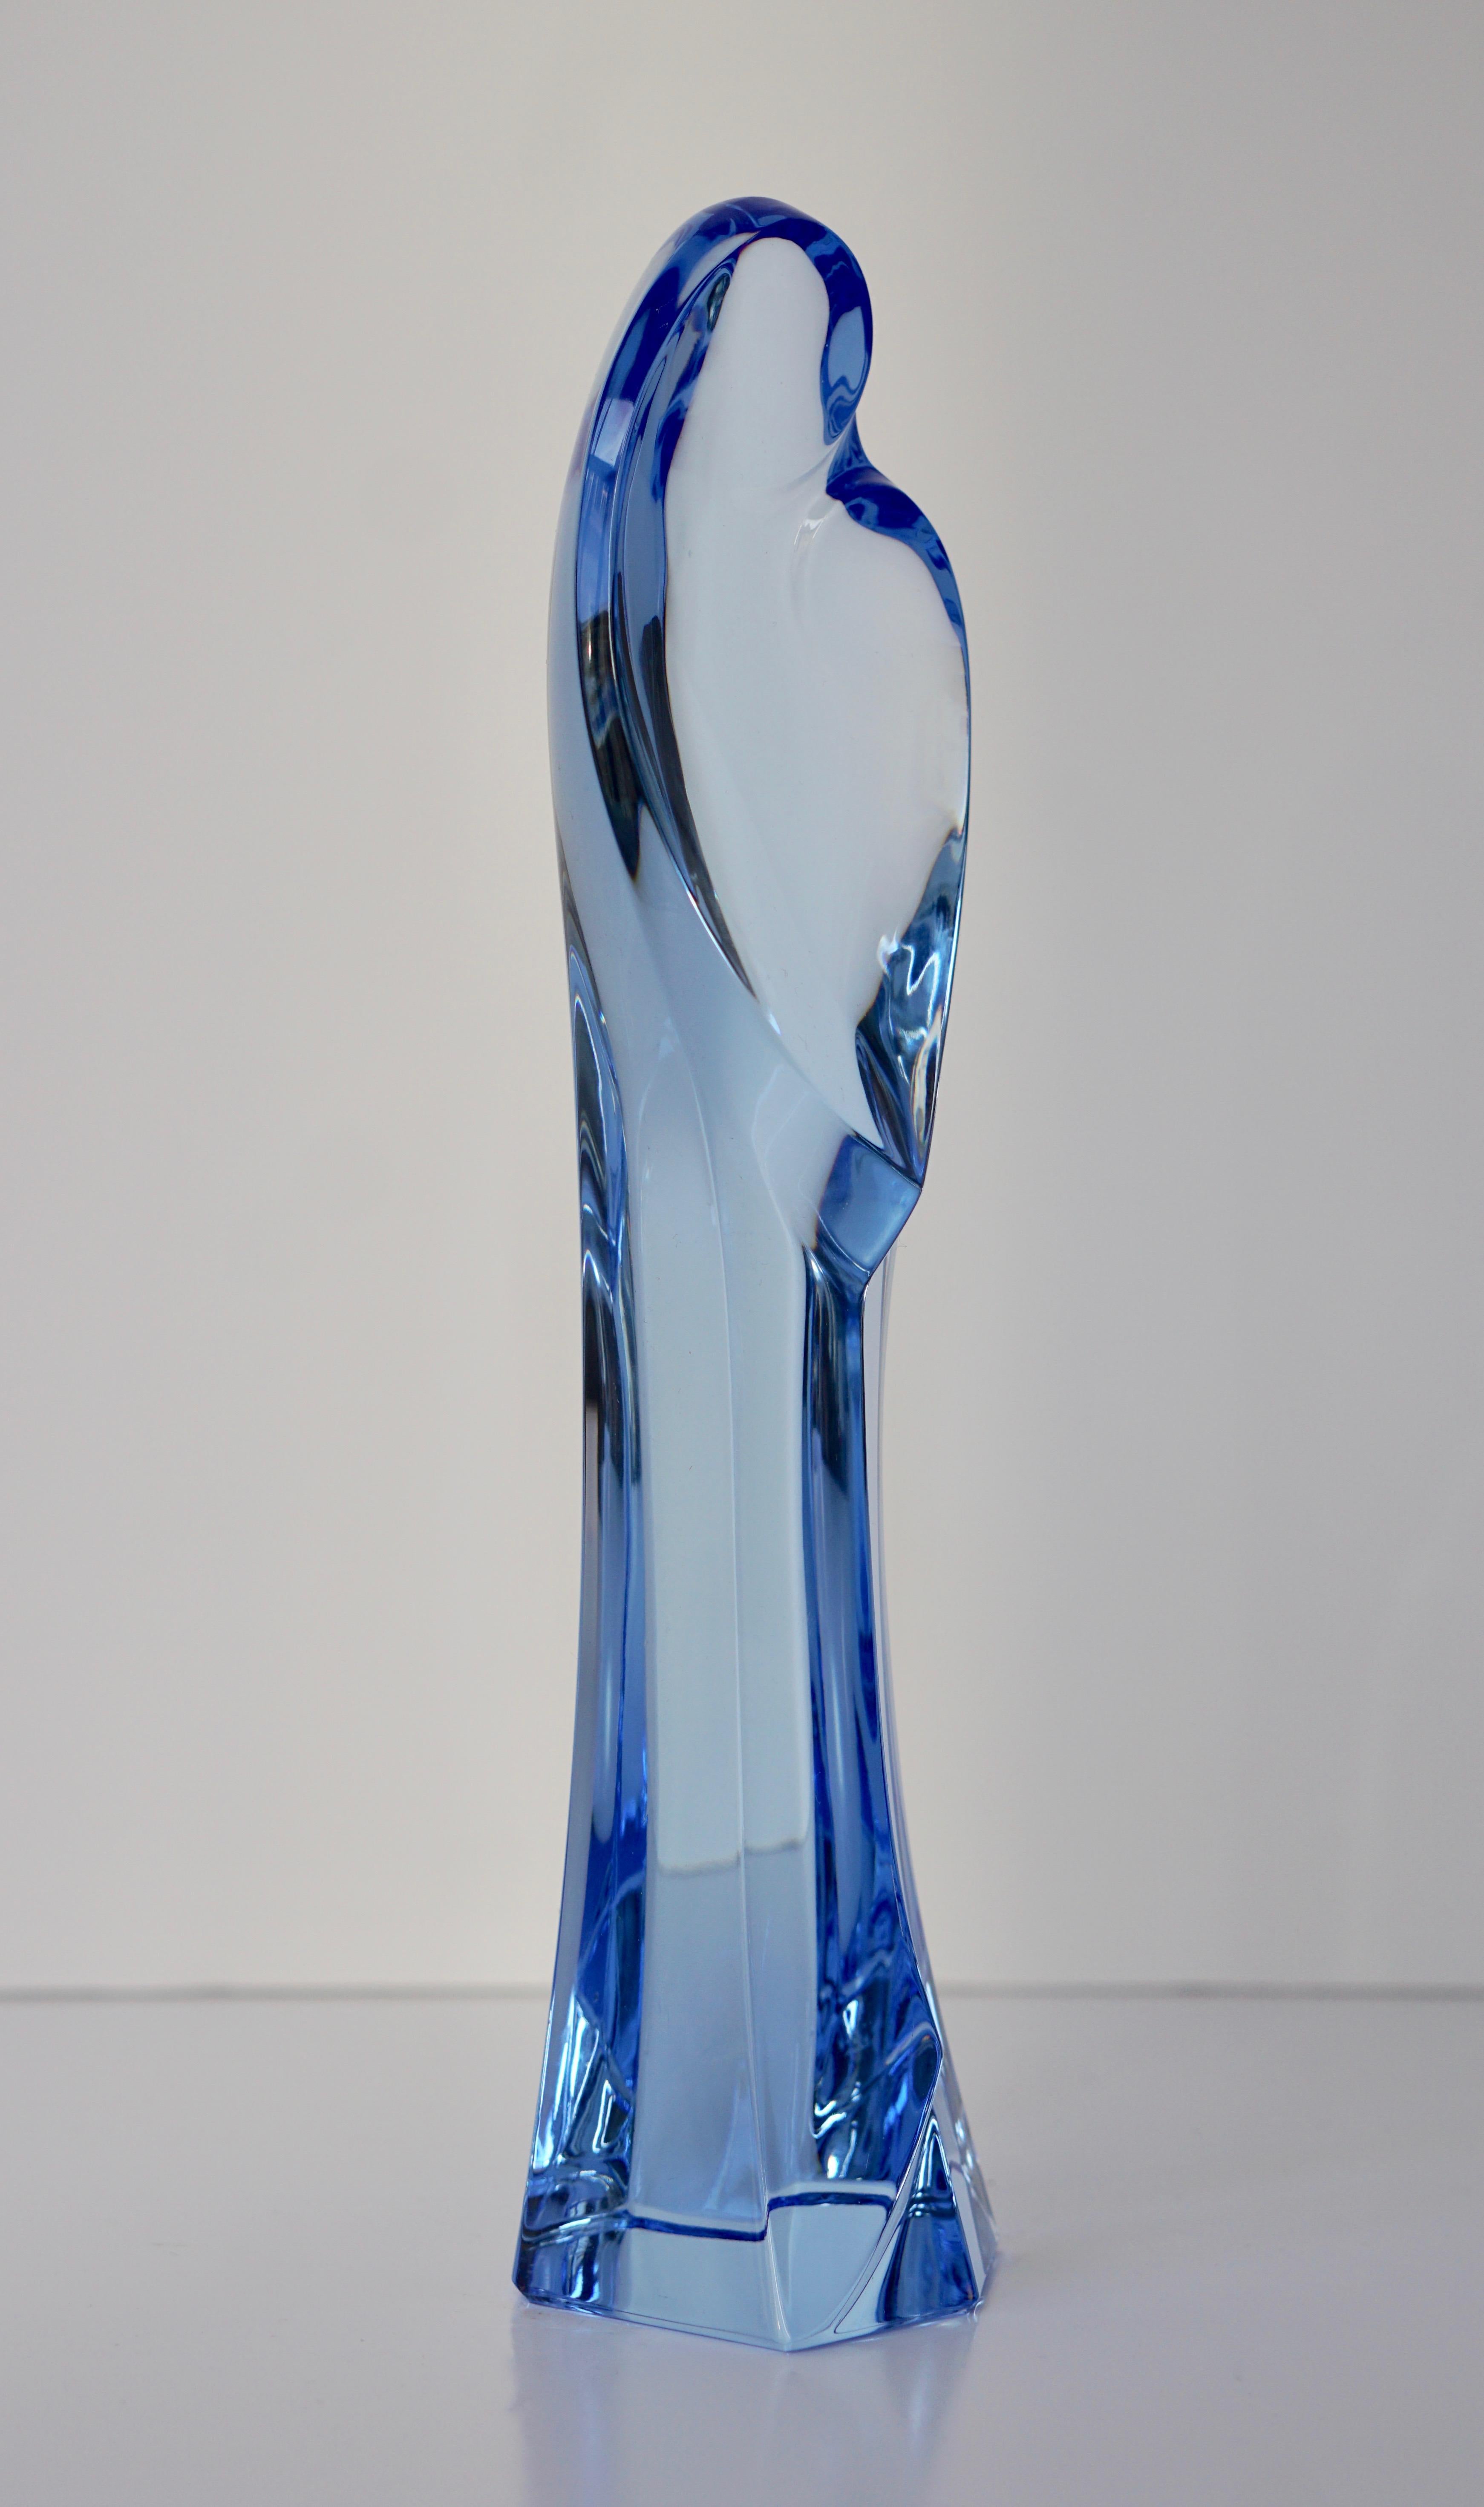 Madonna and Child Sapphire Blue Crystal Sculpture 2